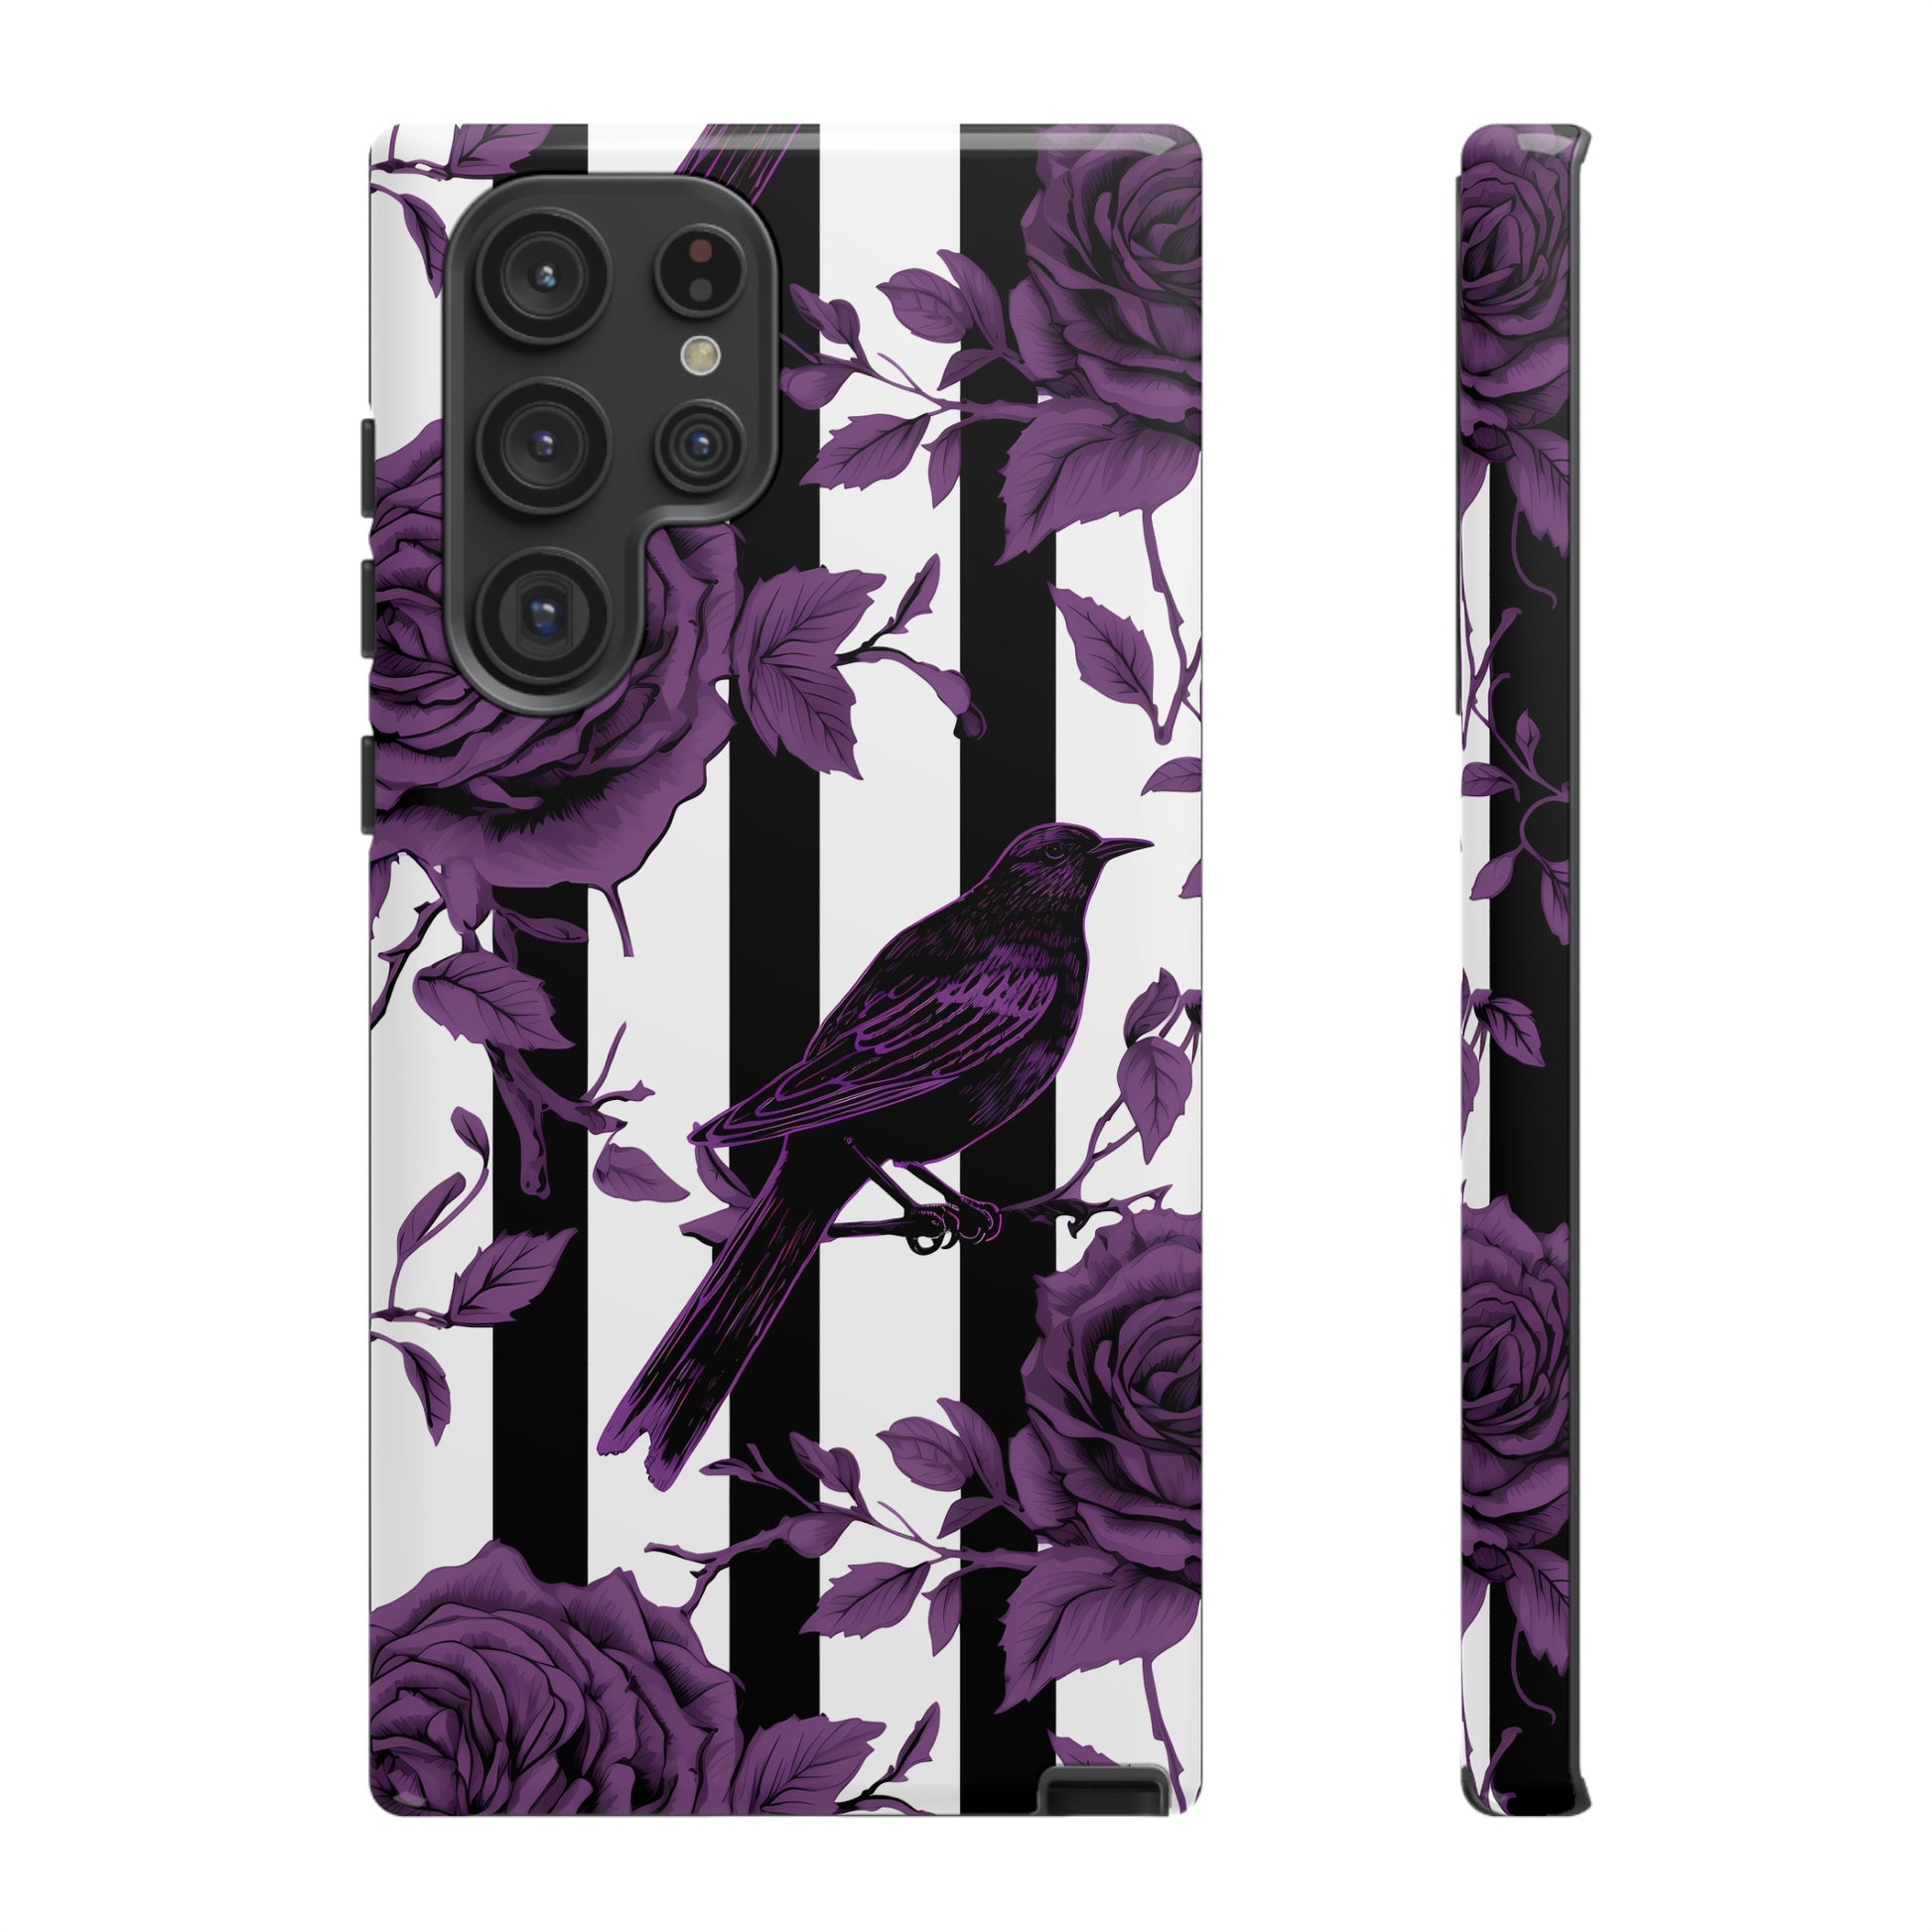 Striped Crows and Roses Tough Cases for iPhone Samsung Google PhonesPhone CaseVTZdesignsSamsung Galaxy S22 UltraGlossyAccessoriescrowsGlossy